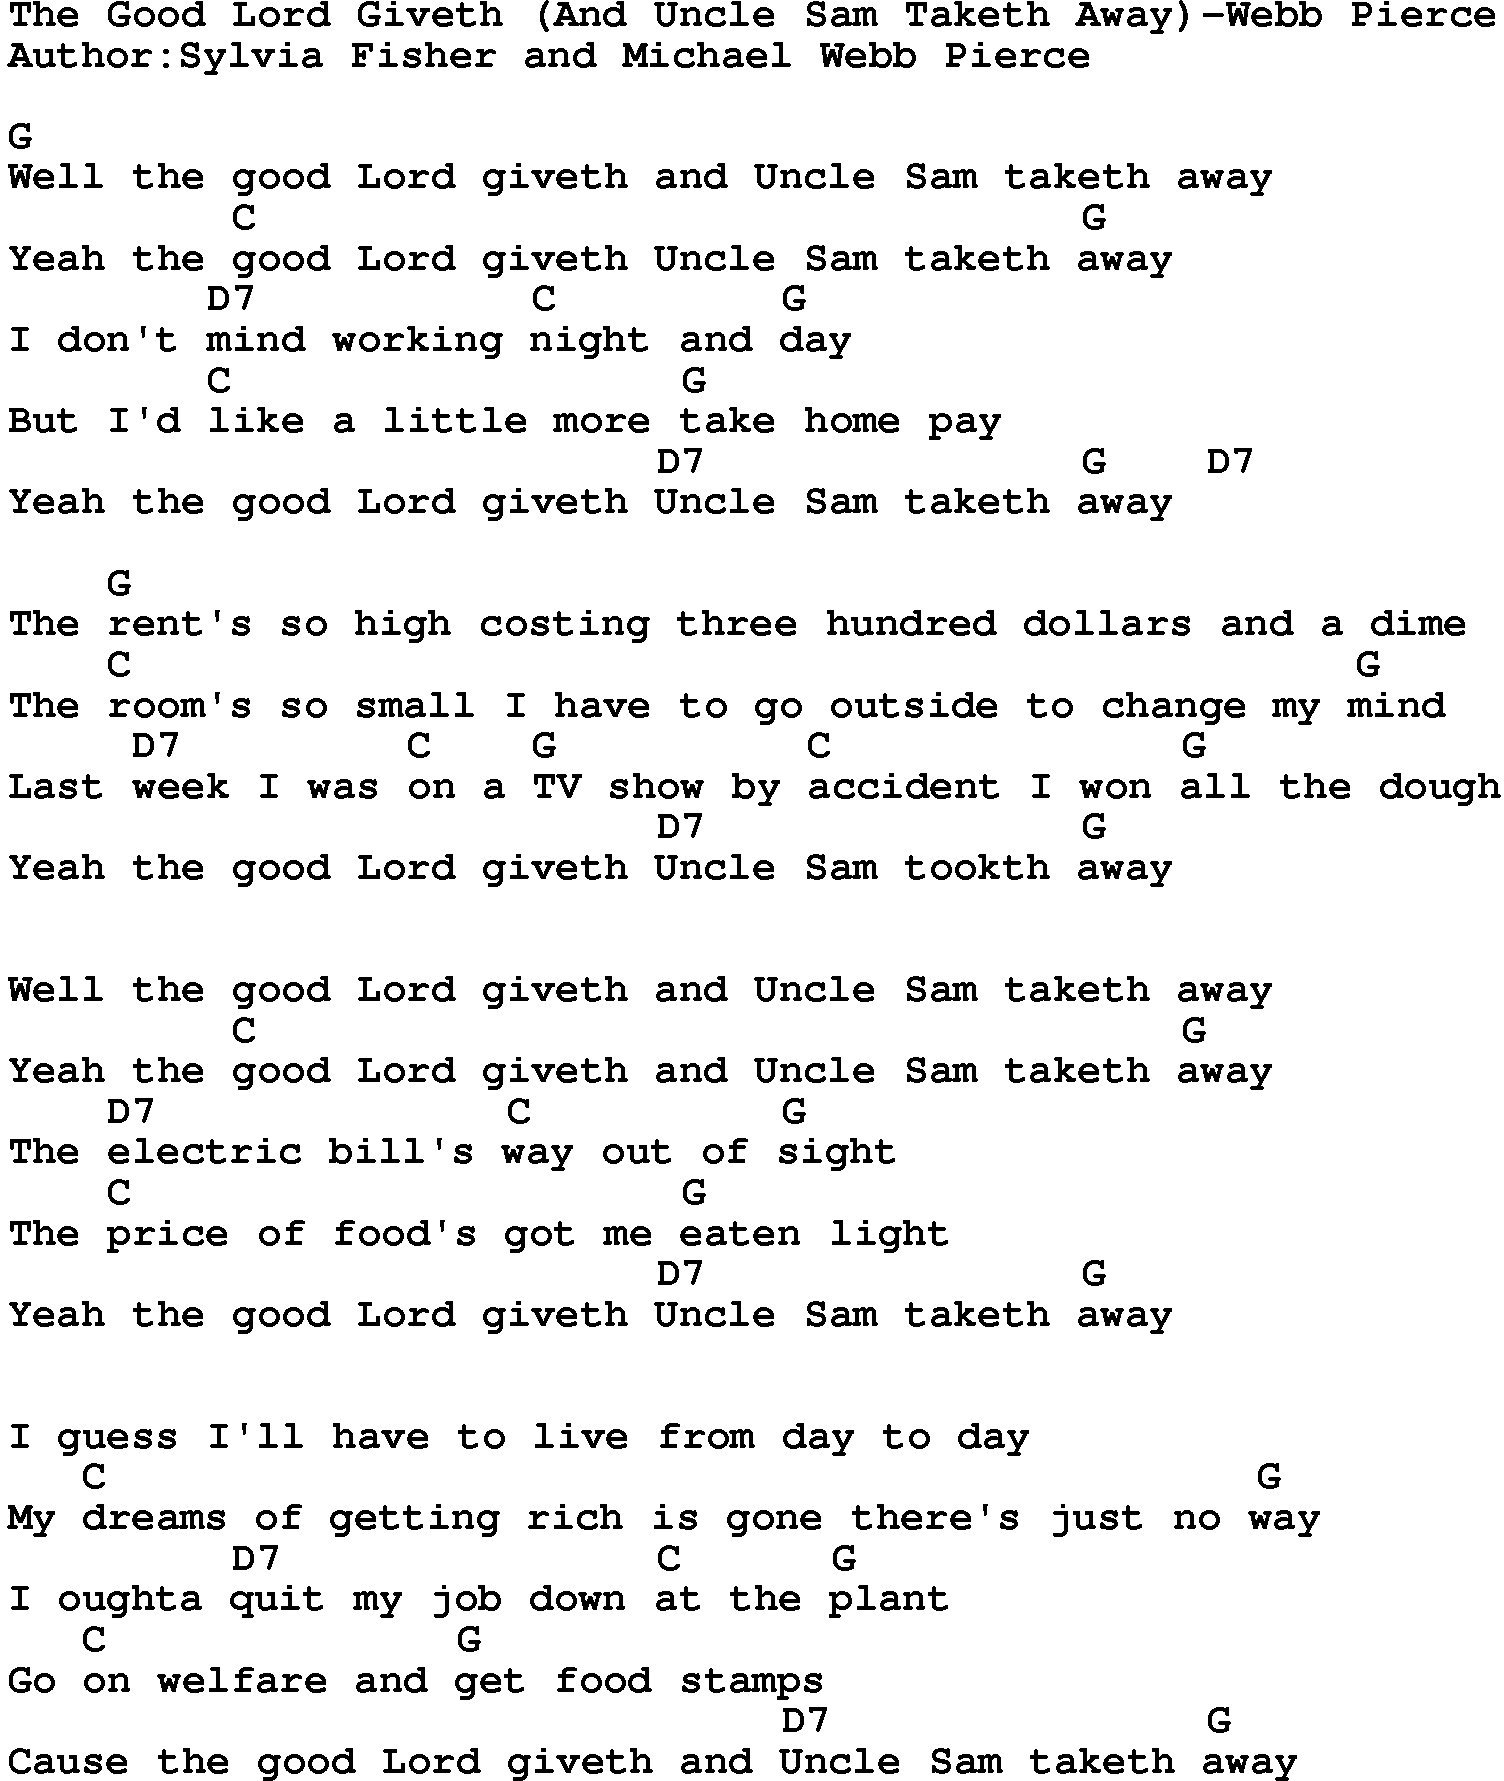 Country music song: The Good Lord Giveth(And Uncle Sam Taketh Away)-Webb Pierce lyrics and chords